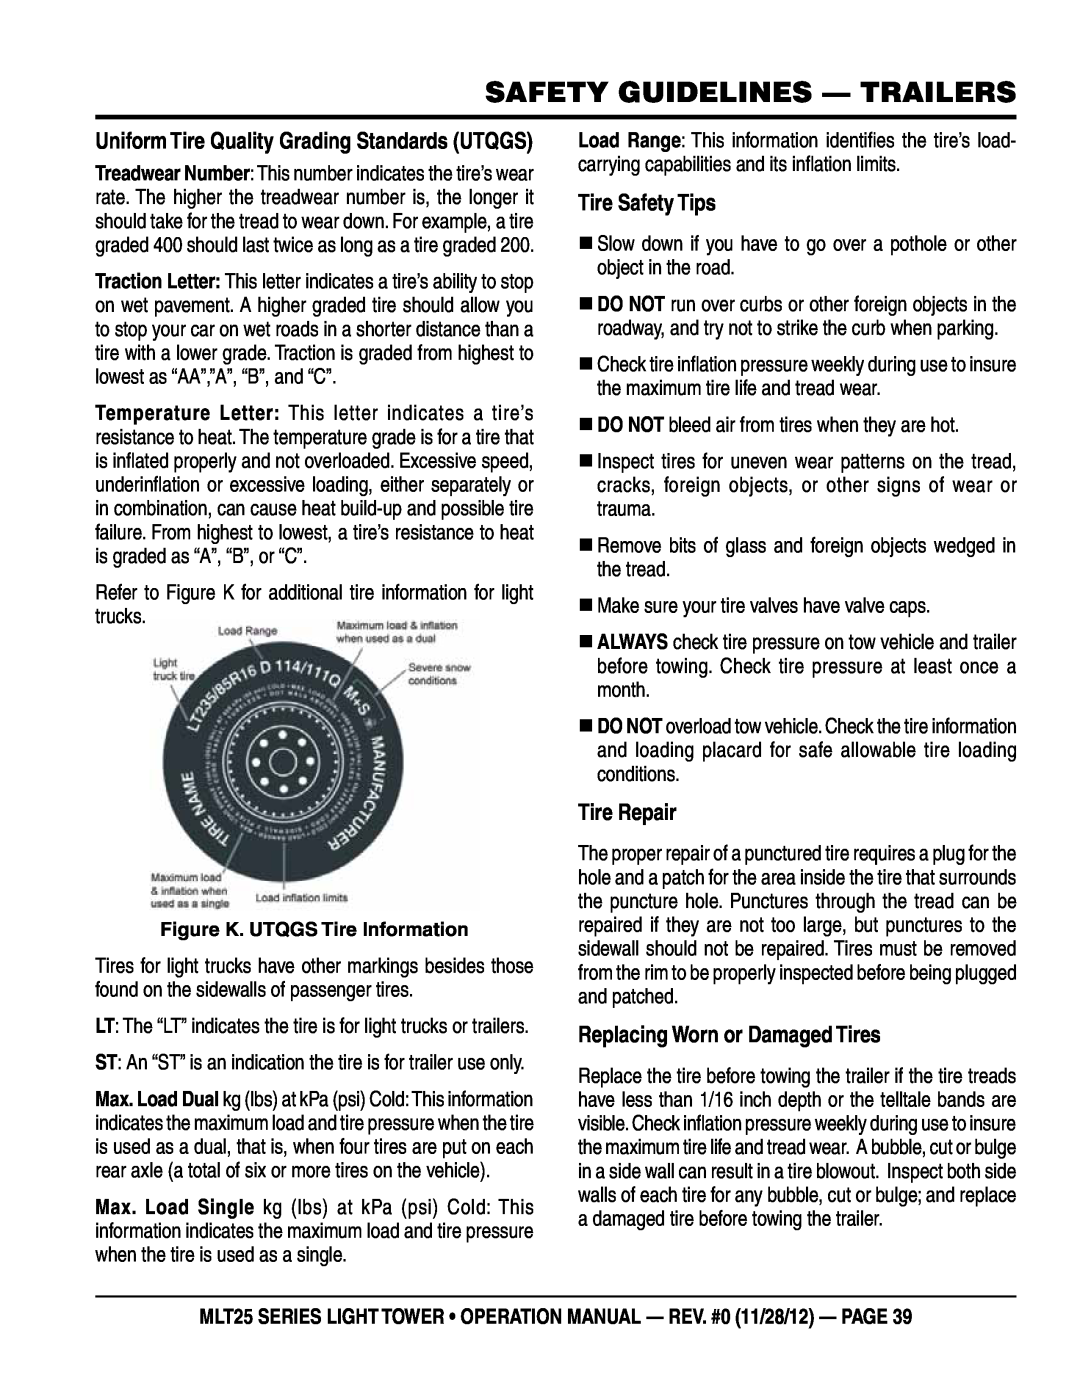 Multiquip MLT25 Tire safety Tips, Tire Repair, Replacing Worn or Damaged Tires, safety guidelines - TRAILERS 